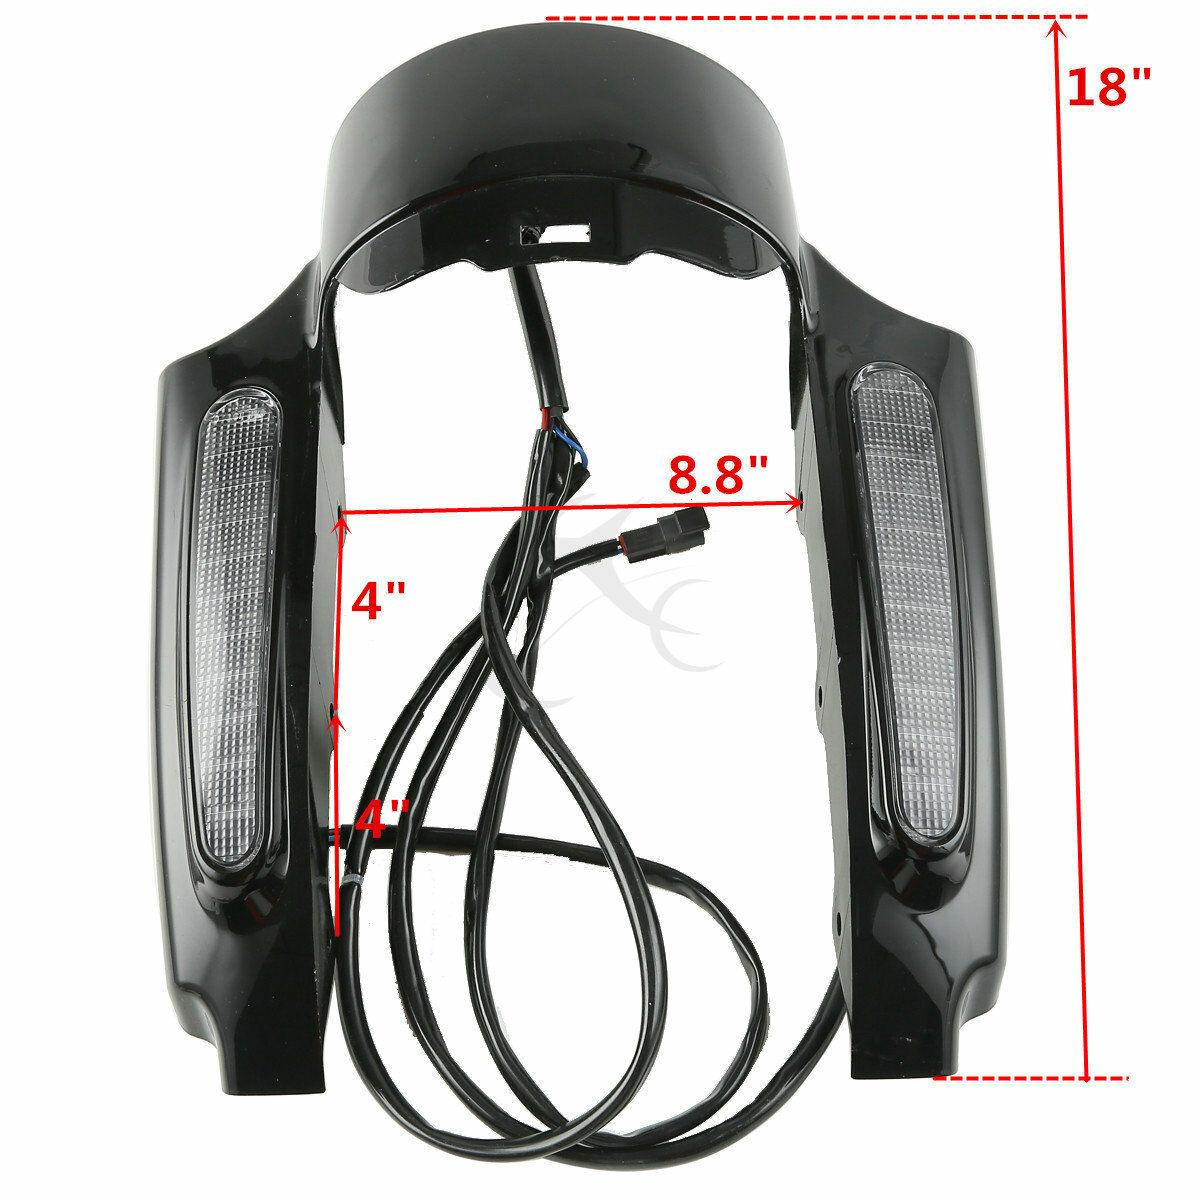 Rear Fender Fascia Set For Harley Touring Road King Glide 2009-2013 2012 2011 US - Moto Life Products